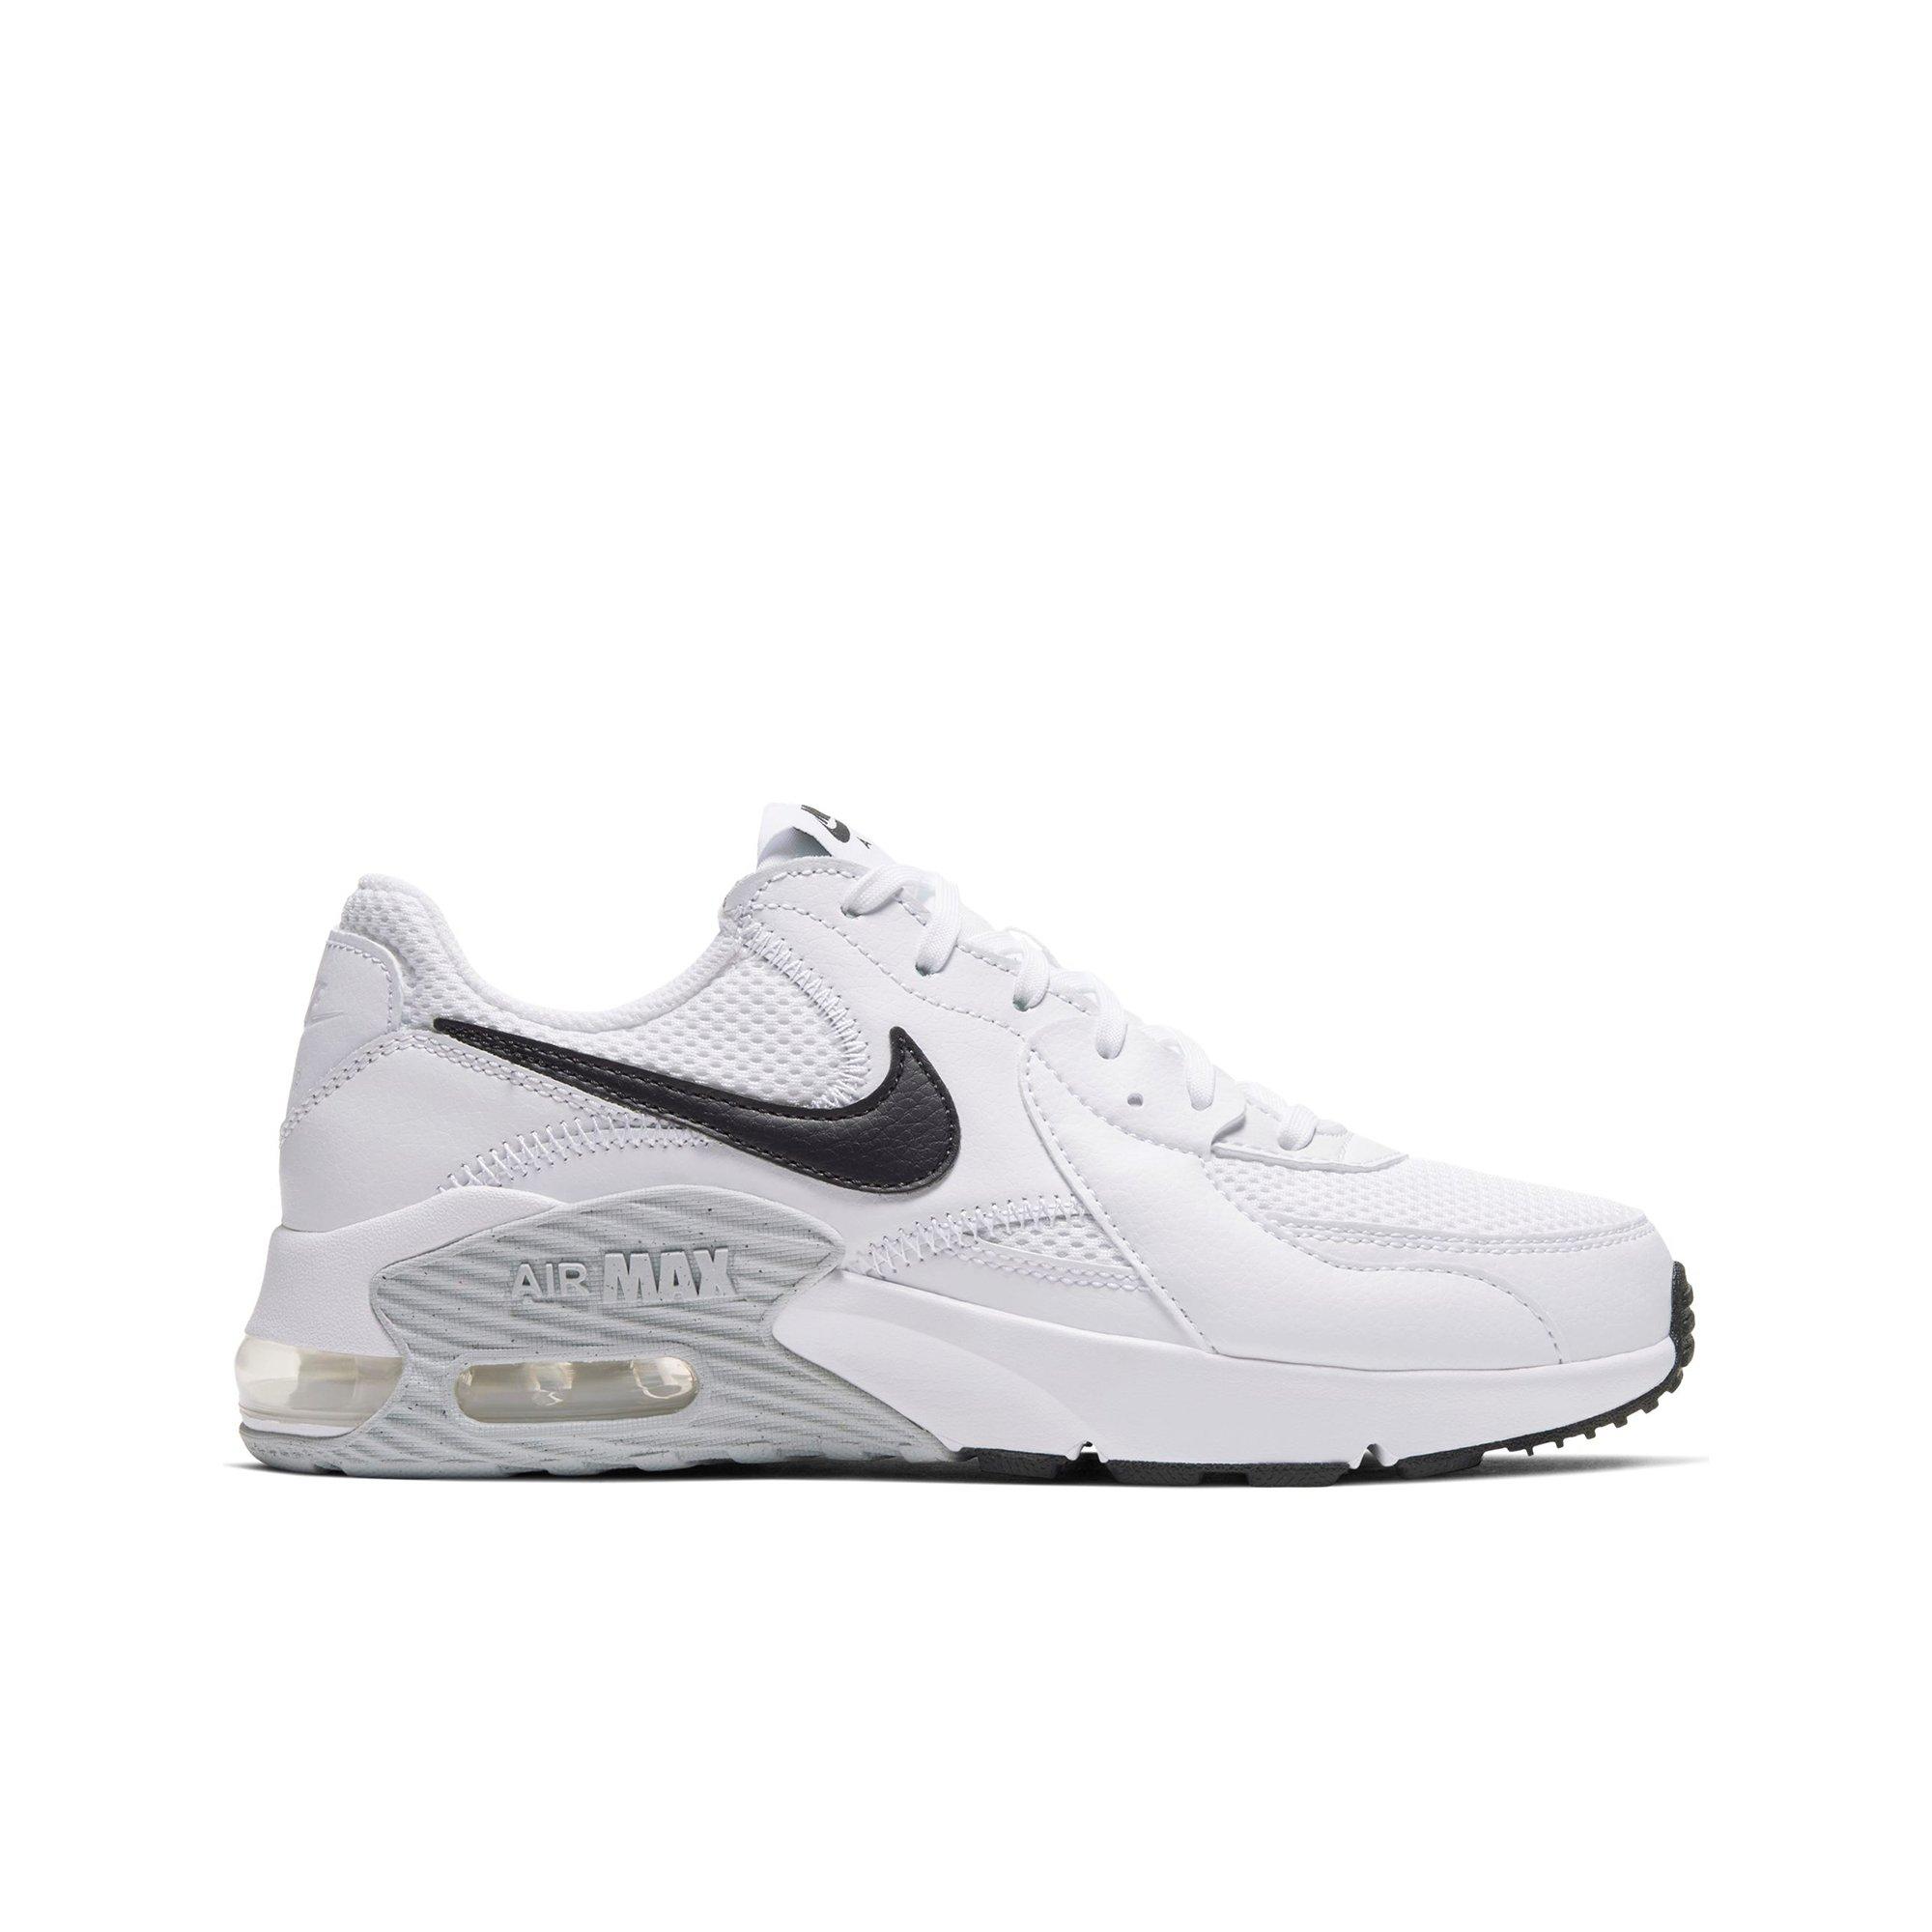 Air Max Excee "White/Black/Grey" Women's